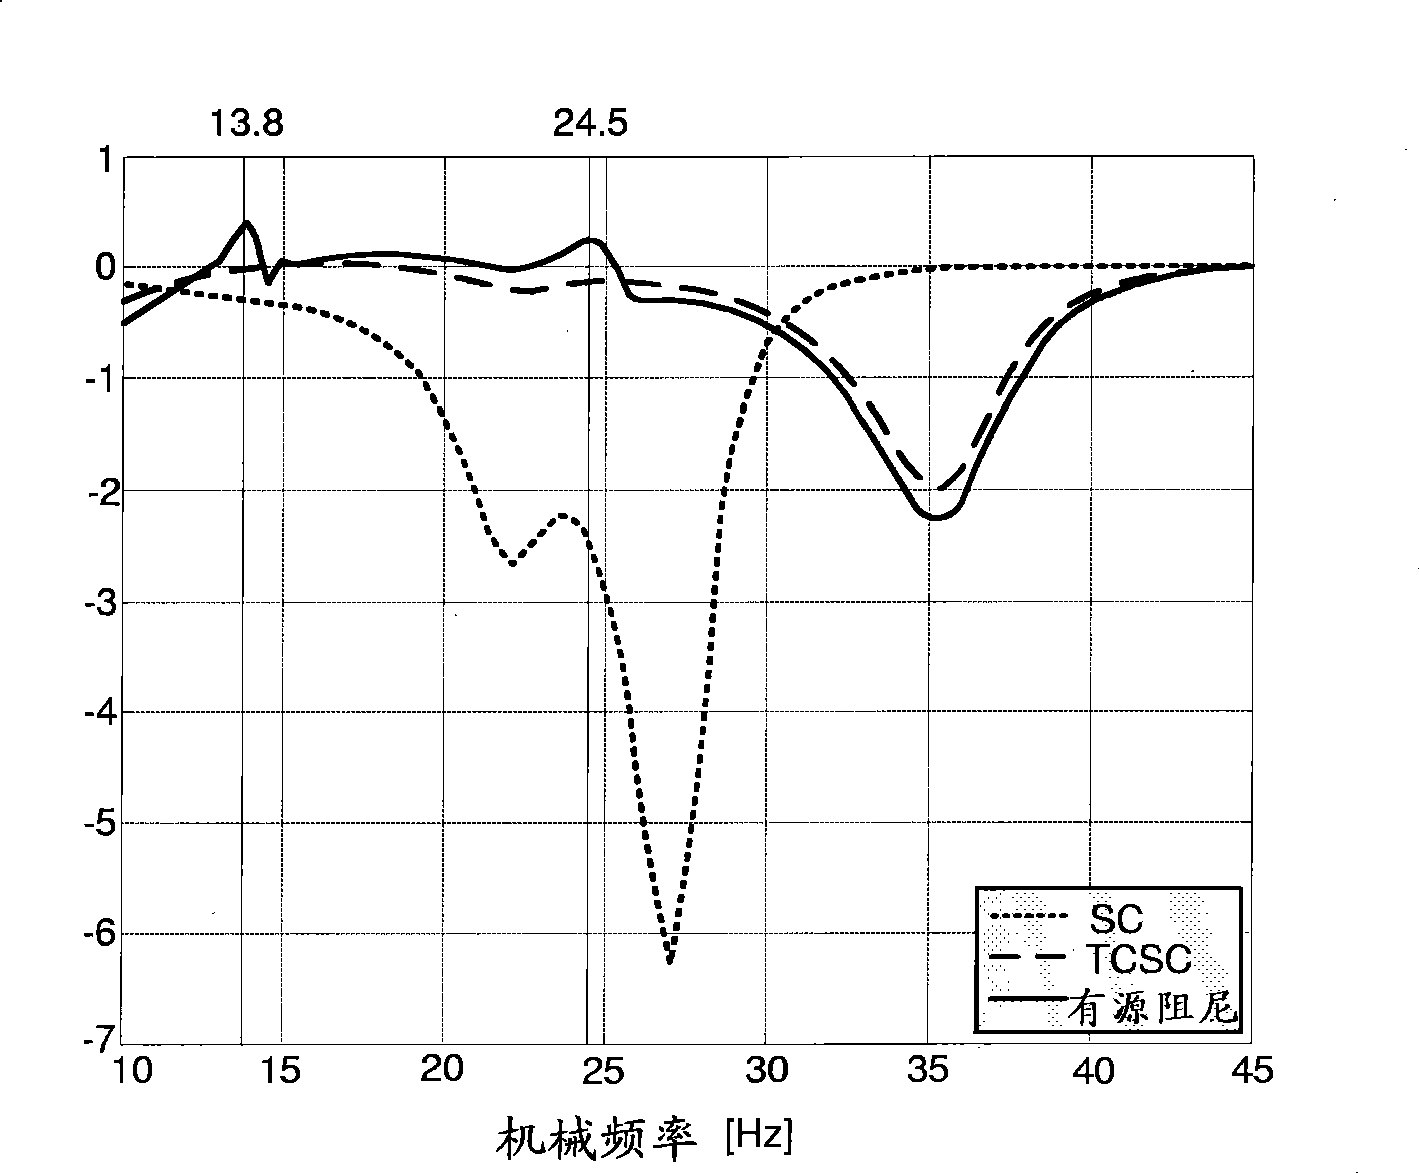 A thyristor controlled series capacitor suitable for damping sub-synchronous resonance